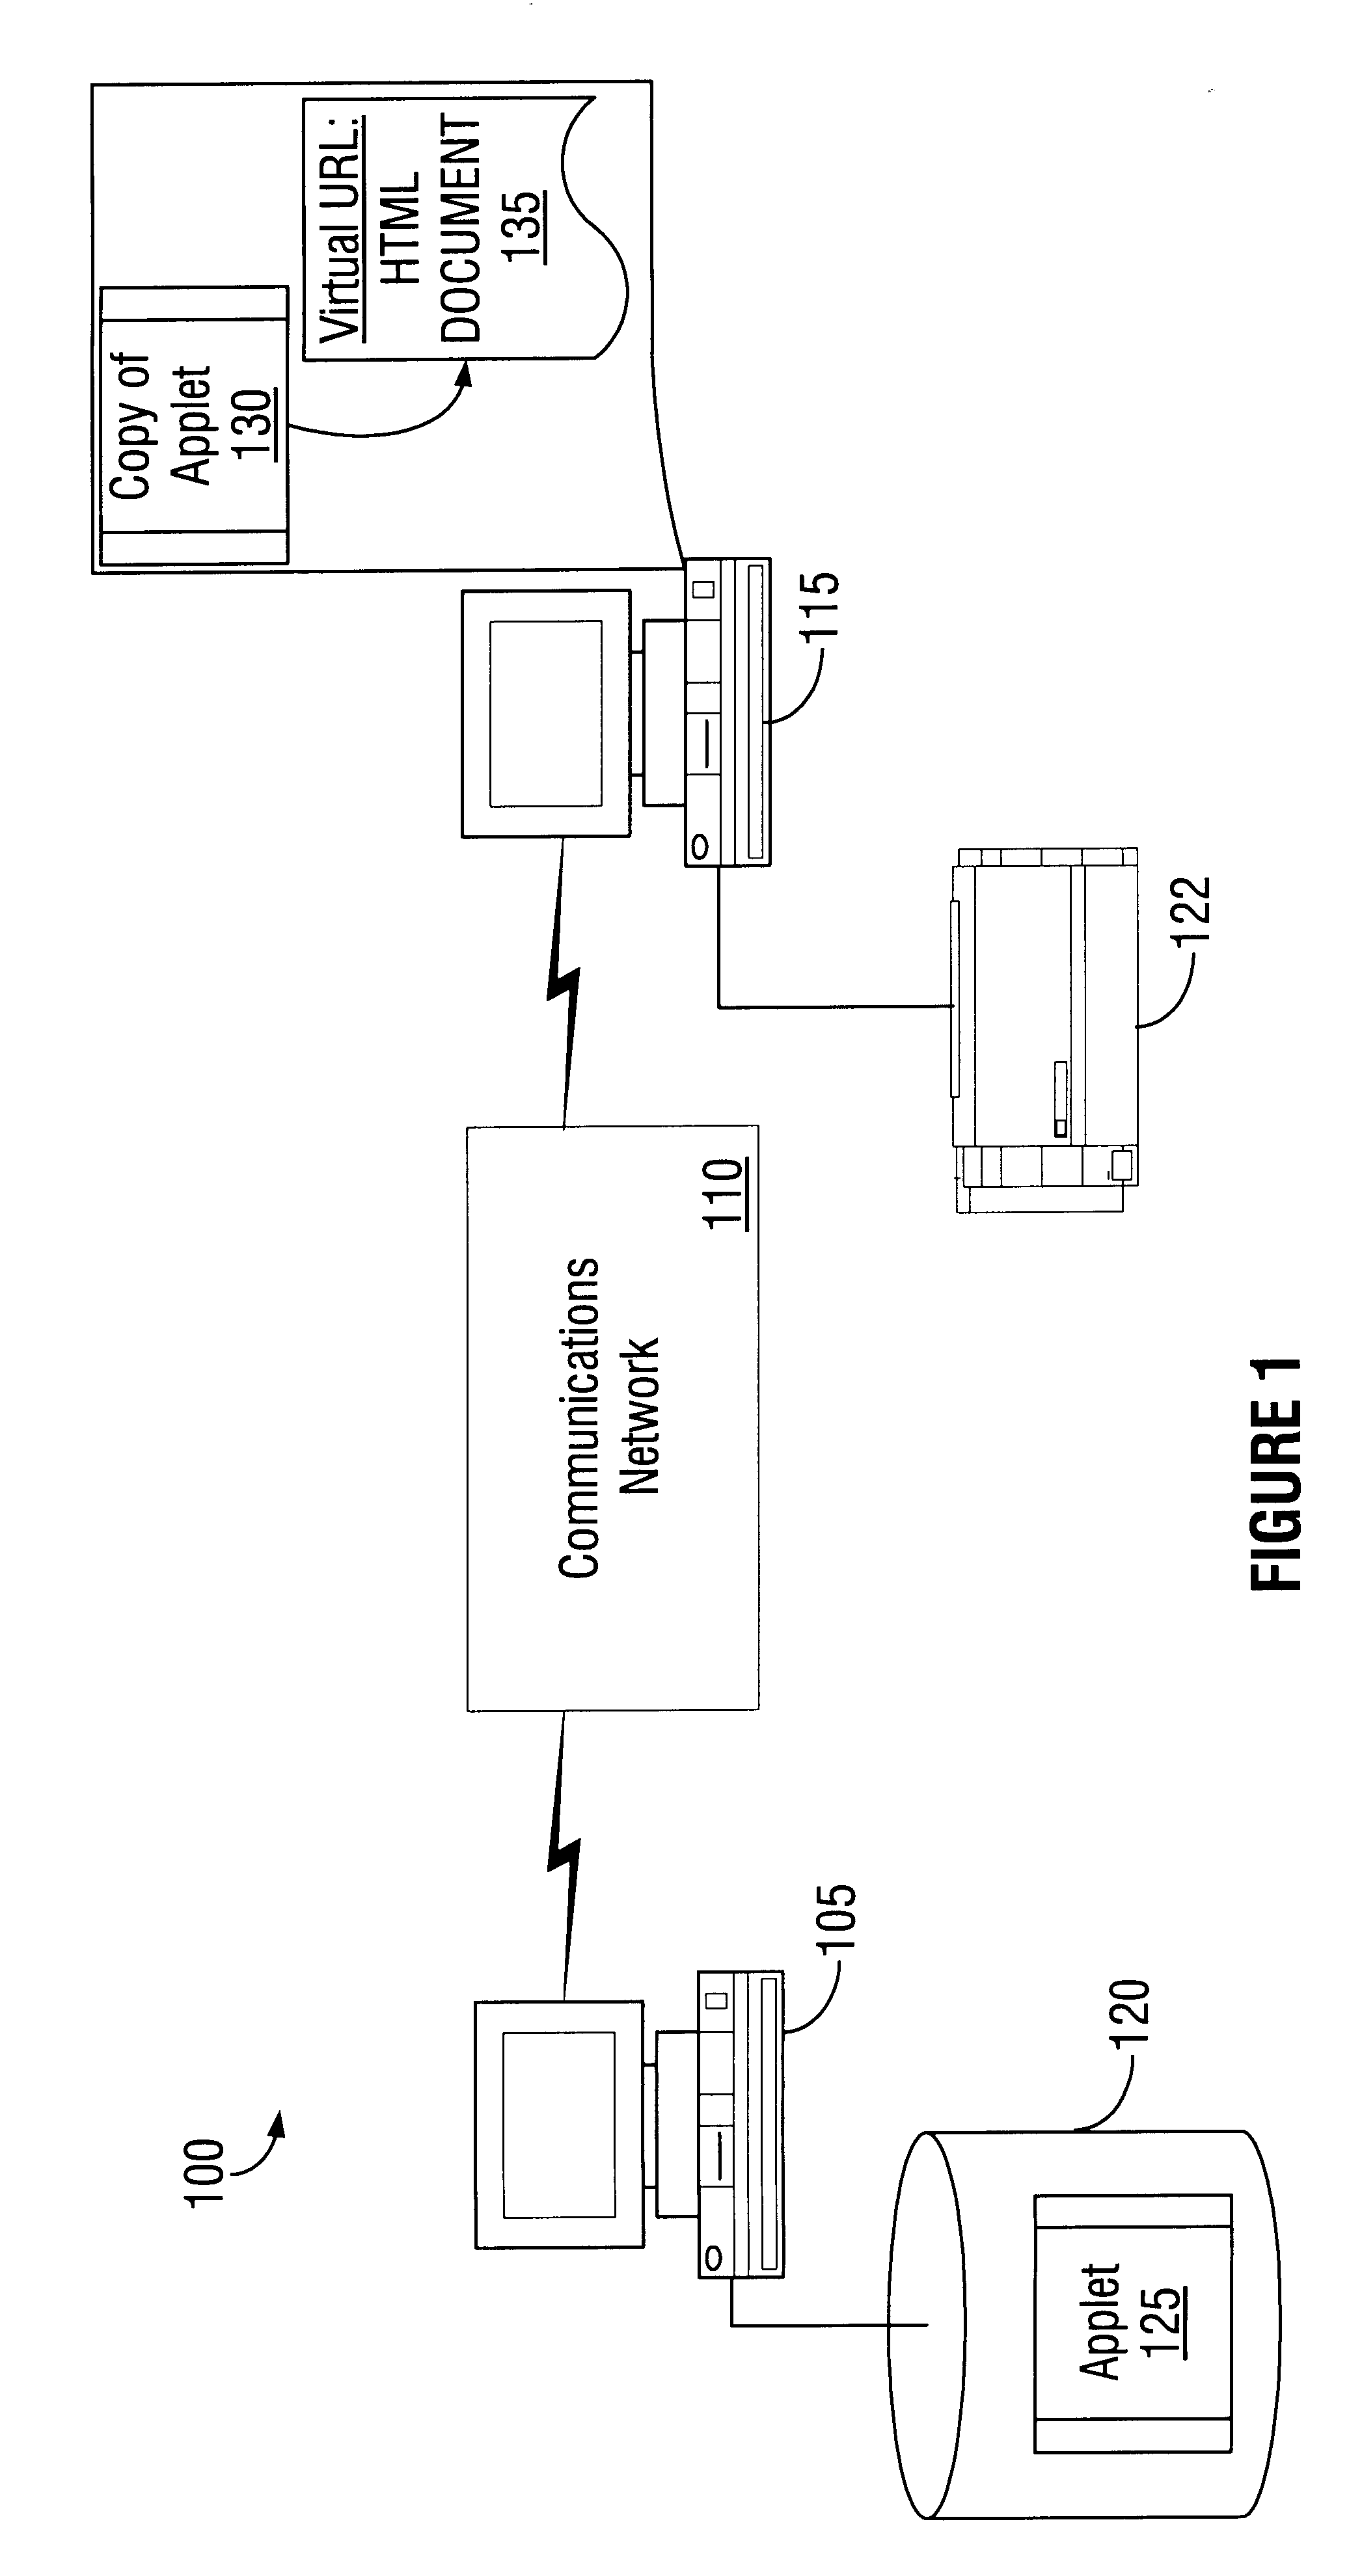 Method and apparatus for generating a remote printable report